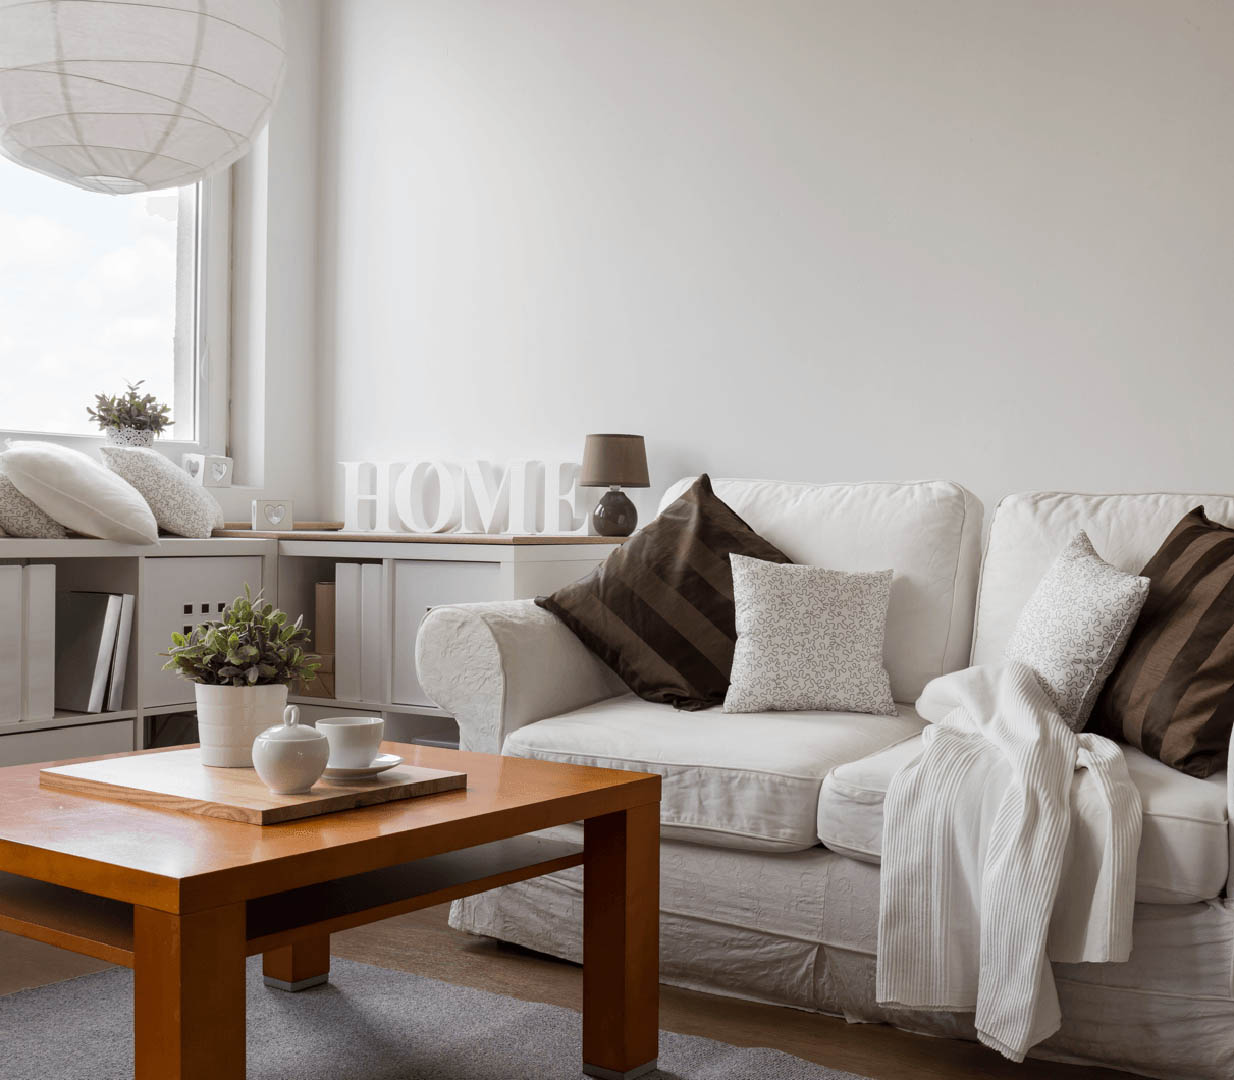 Home Decor Tips for People Who Can’t Decorate Living Room Image